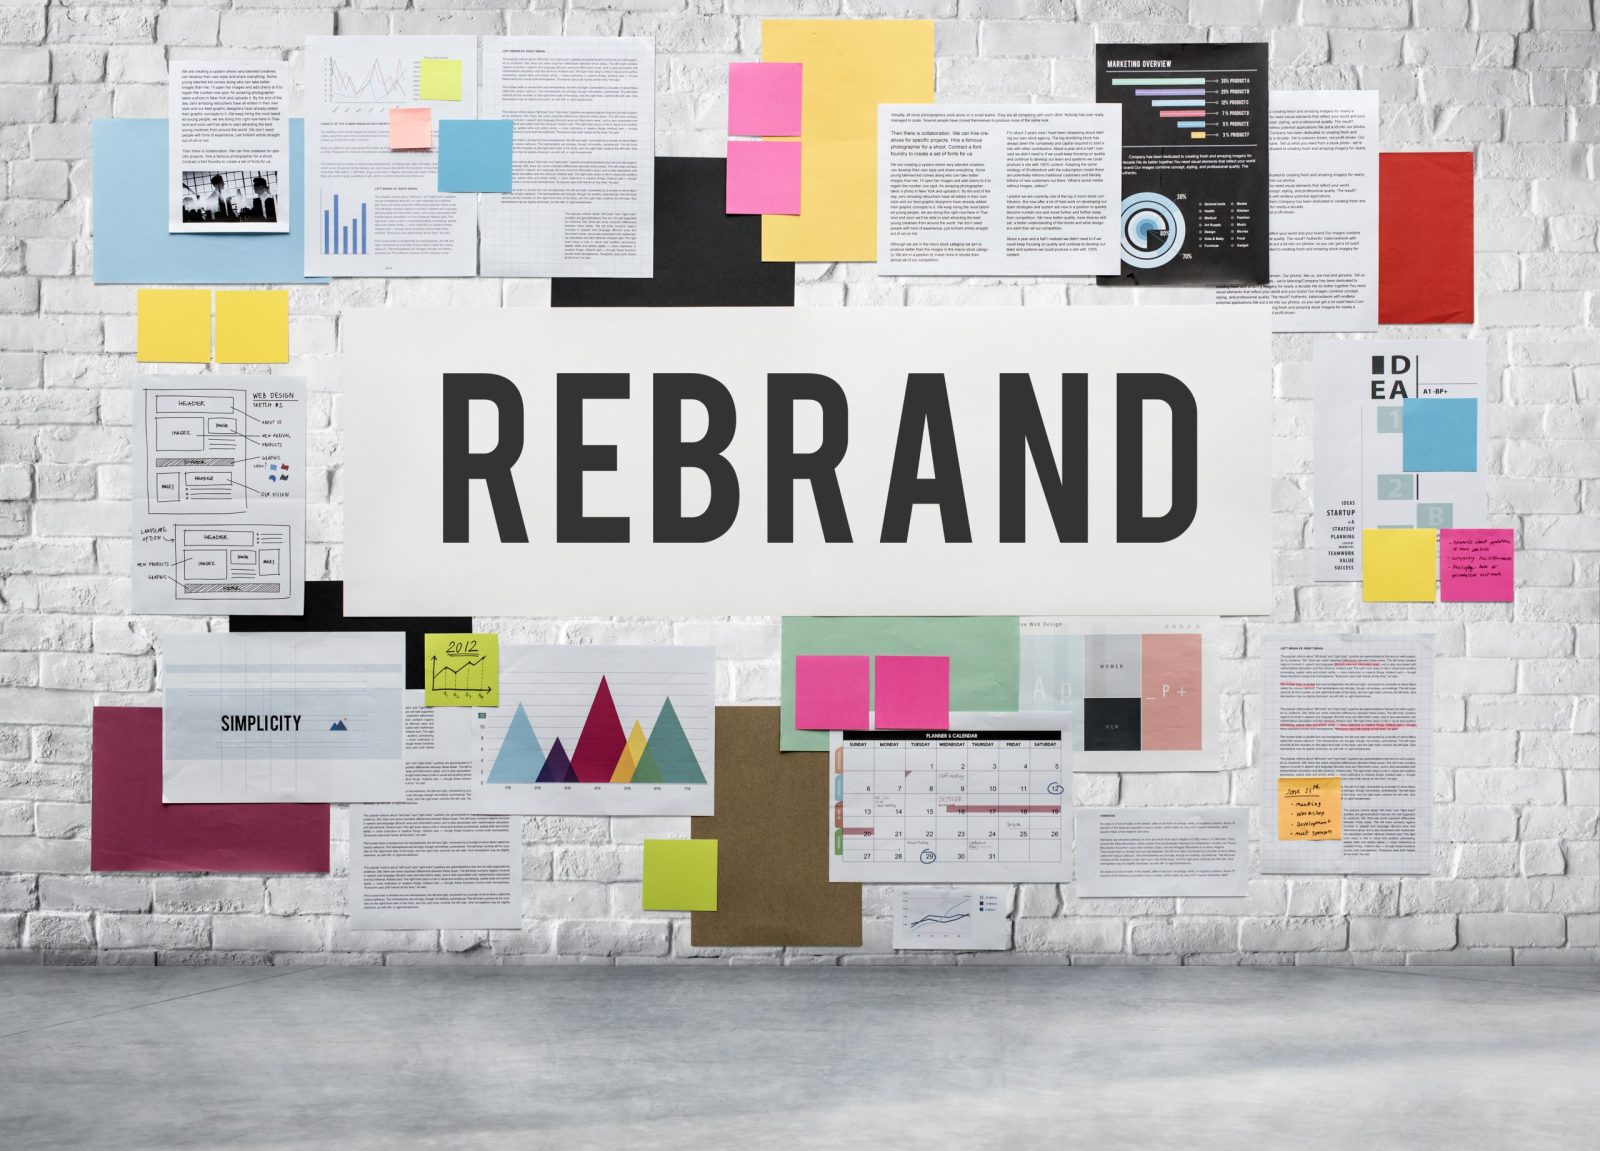 Brand Reputation Management: How to Do it Right